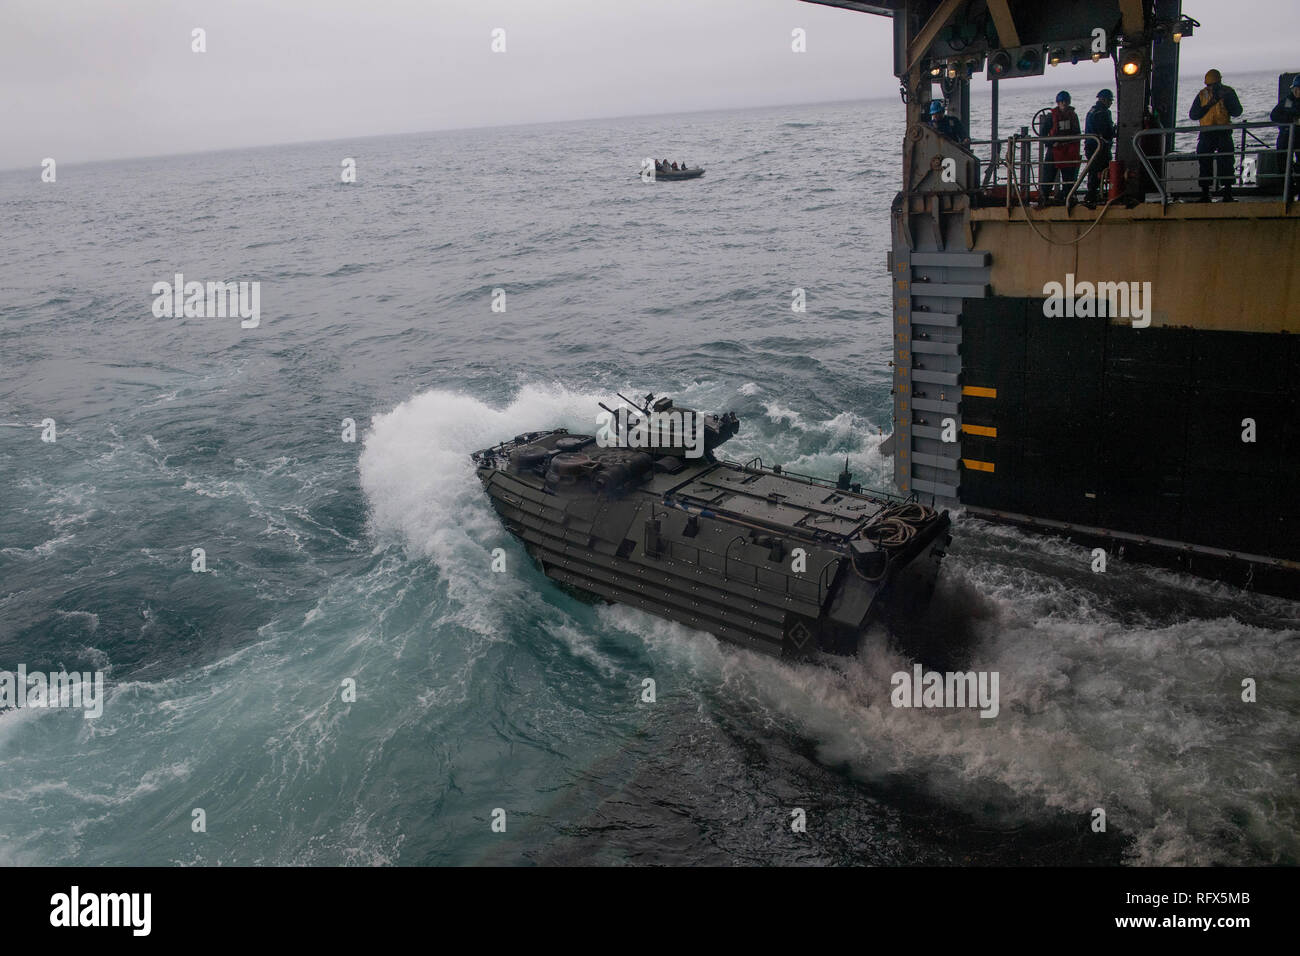 190116-N-HD110-0084  PACIFIC OCEAN (Jan. 16, 2019) An assault amphibious vehicle attached to Battalion Landing Team 3rd Battalion, 5th Marine Regiment, 11th Marine Expeditionary Unit exits the well deck of the Harpers Ferry-class amphibious dock landing ship USS Harpers Ferry (LSD 49) during a training exercise. Harpers Ferry is underway conducting routine operations as a part of USS Boxer Amphibious Ready Group (ARG) in the eastern Pacific Ocean. (U.S. Navy photo by Mass Communication Specialist 3rd Class Danielle A. Baker) Stock Photo